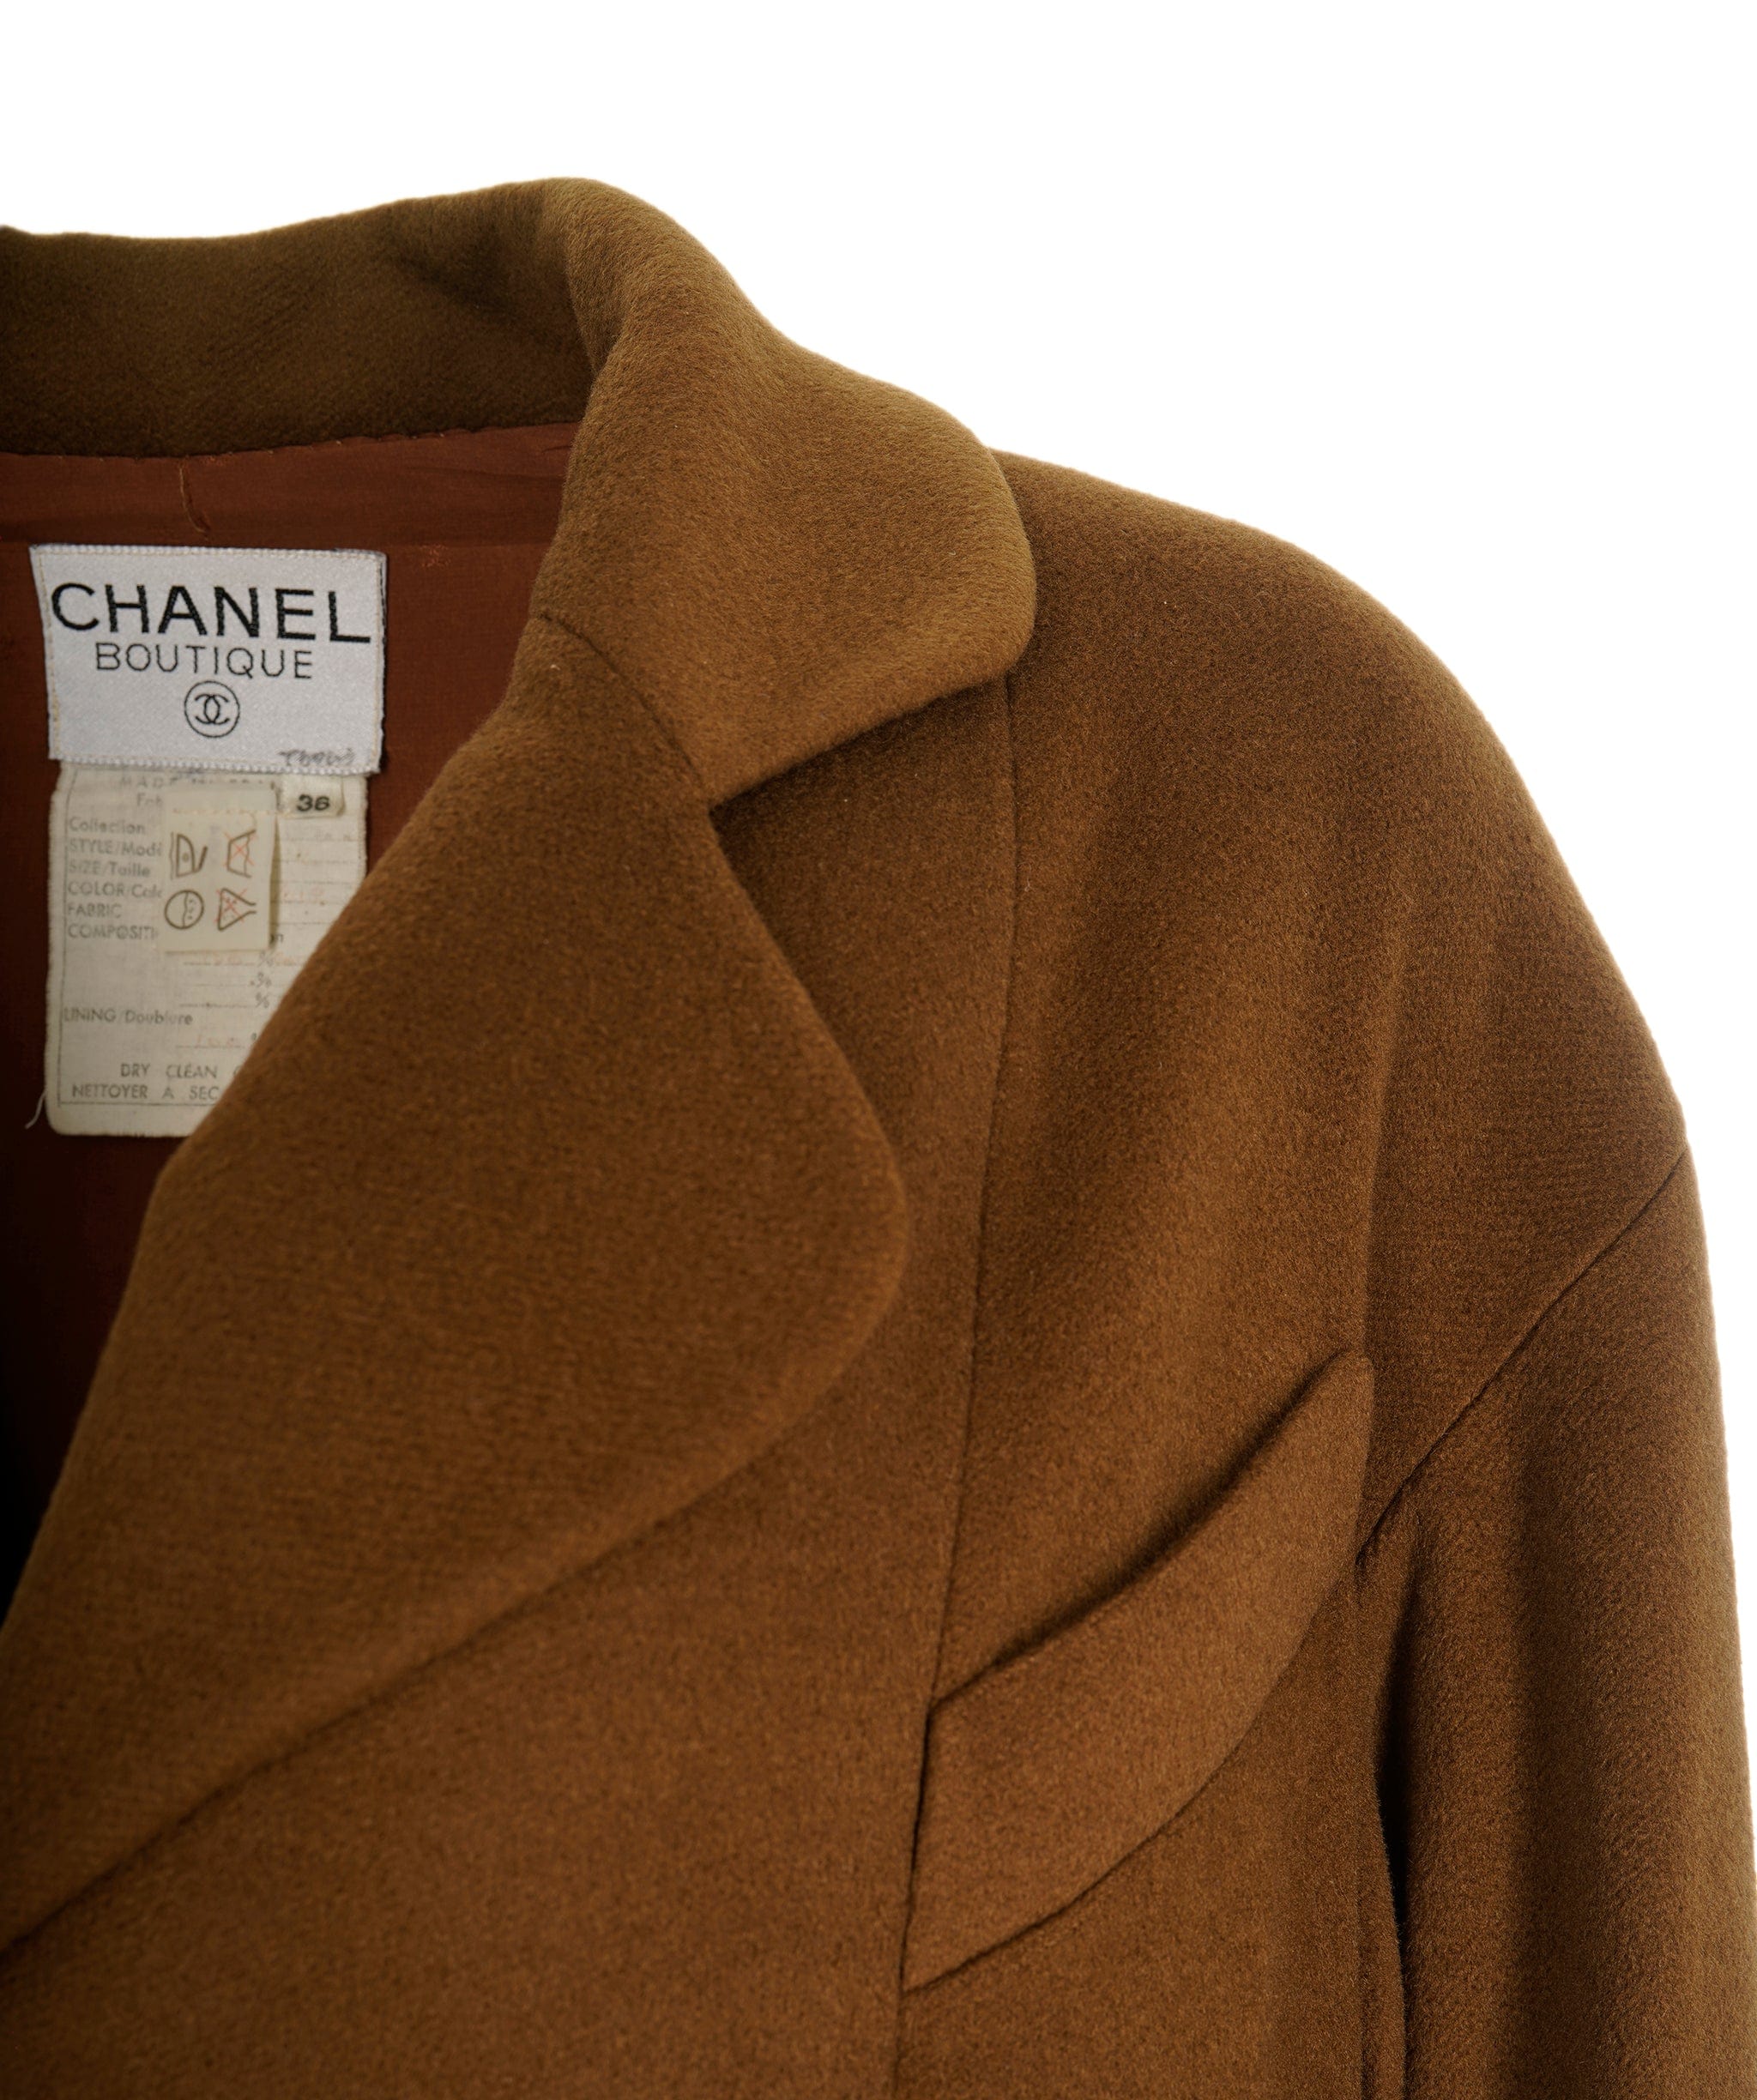 Chanel Chanel #36 CC Logos Button Long Sleeve Jacket Coat Brown Cashmere 79777 ASL9049